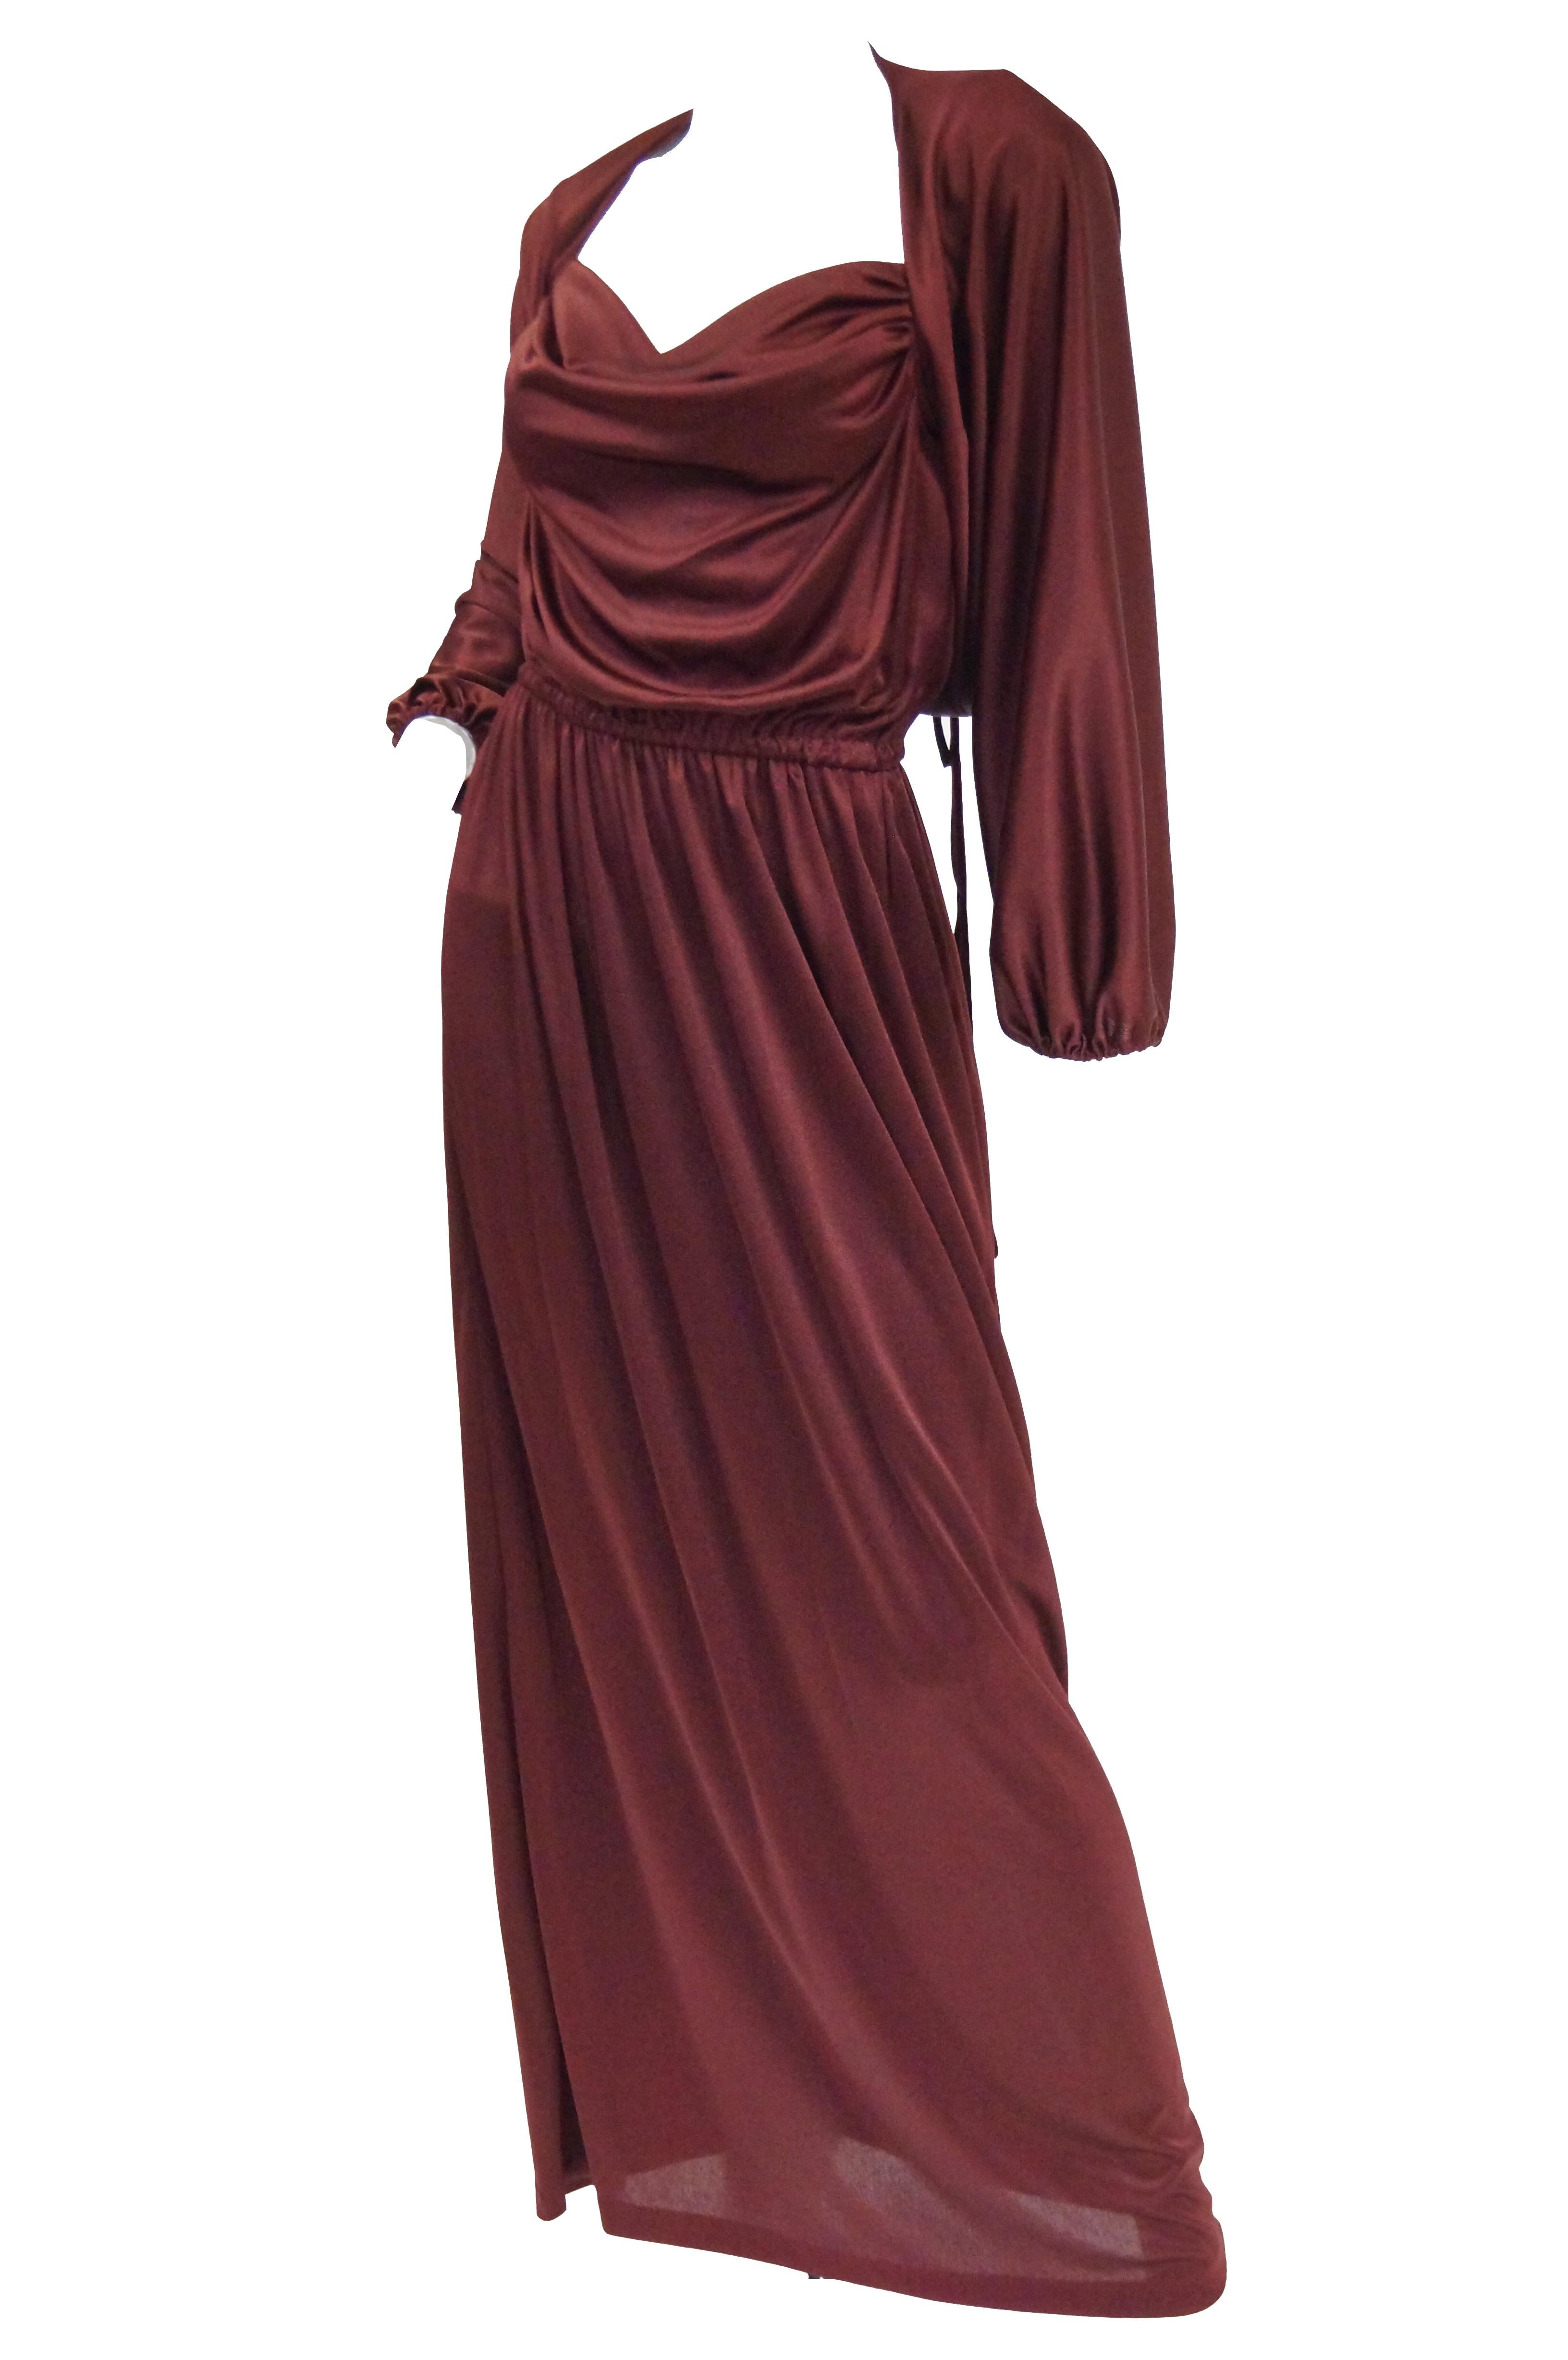 Brown 1970s Joy Stevens Tyrian Purple Draped Knit Evening Dress with Jacket For Sale